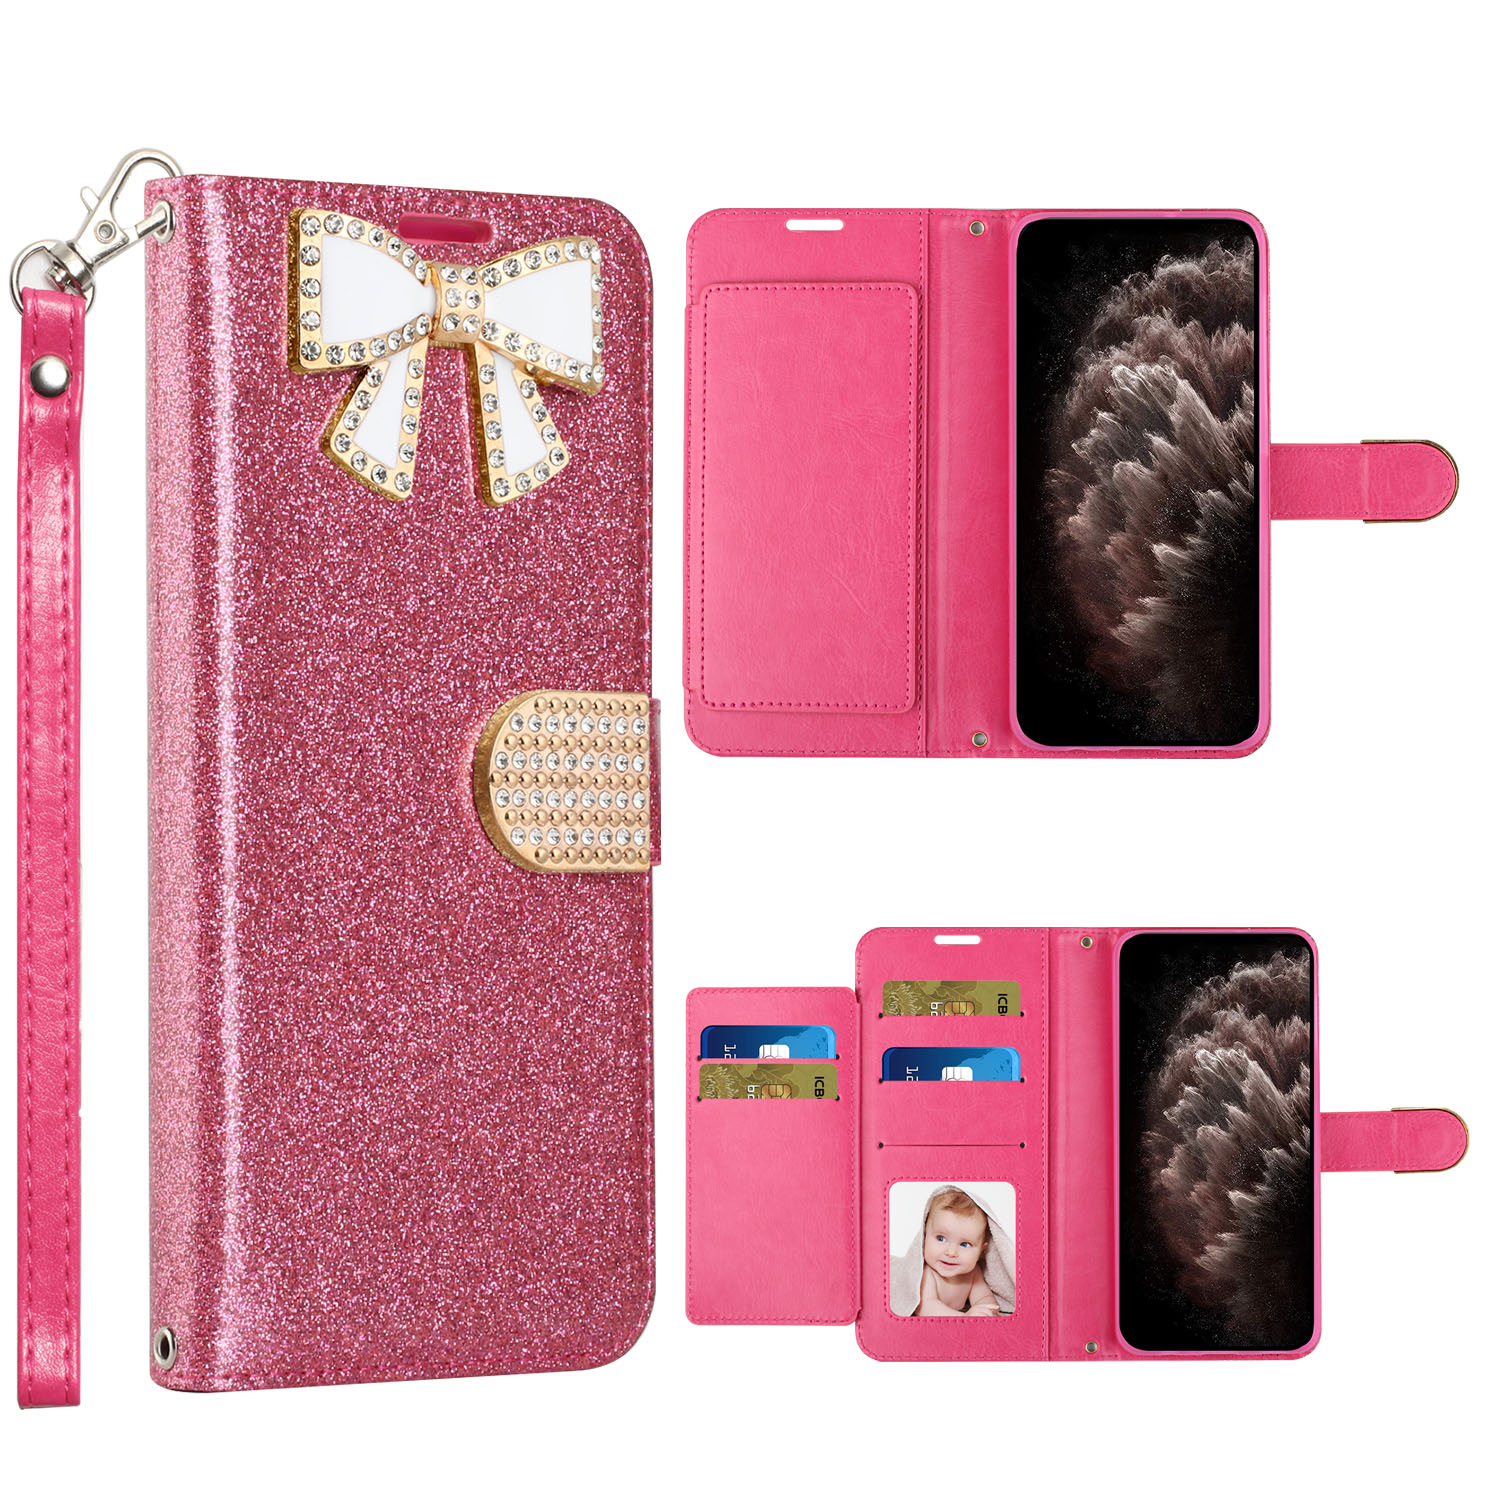 Ribbon Bow Crystal Diamond Flip BOOK Wallet Case for Apple iPhone 13 Pro [6.1] (Hot Pink)